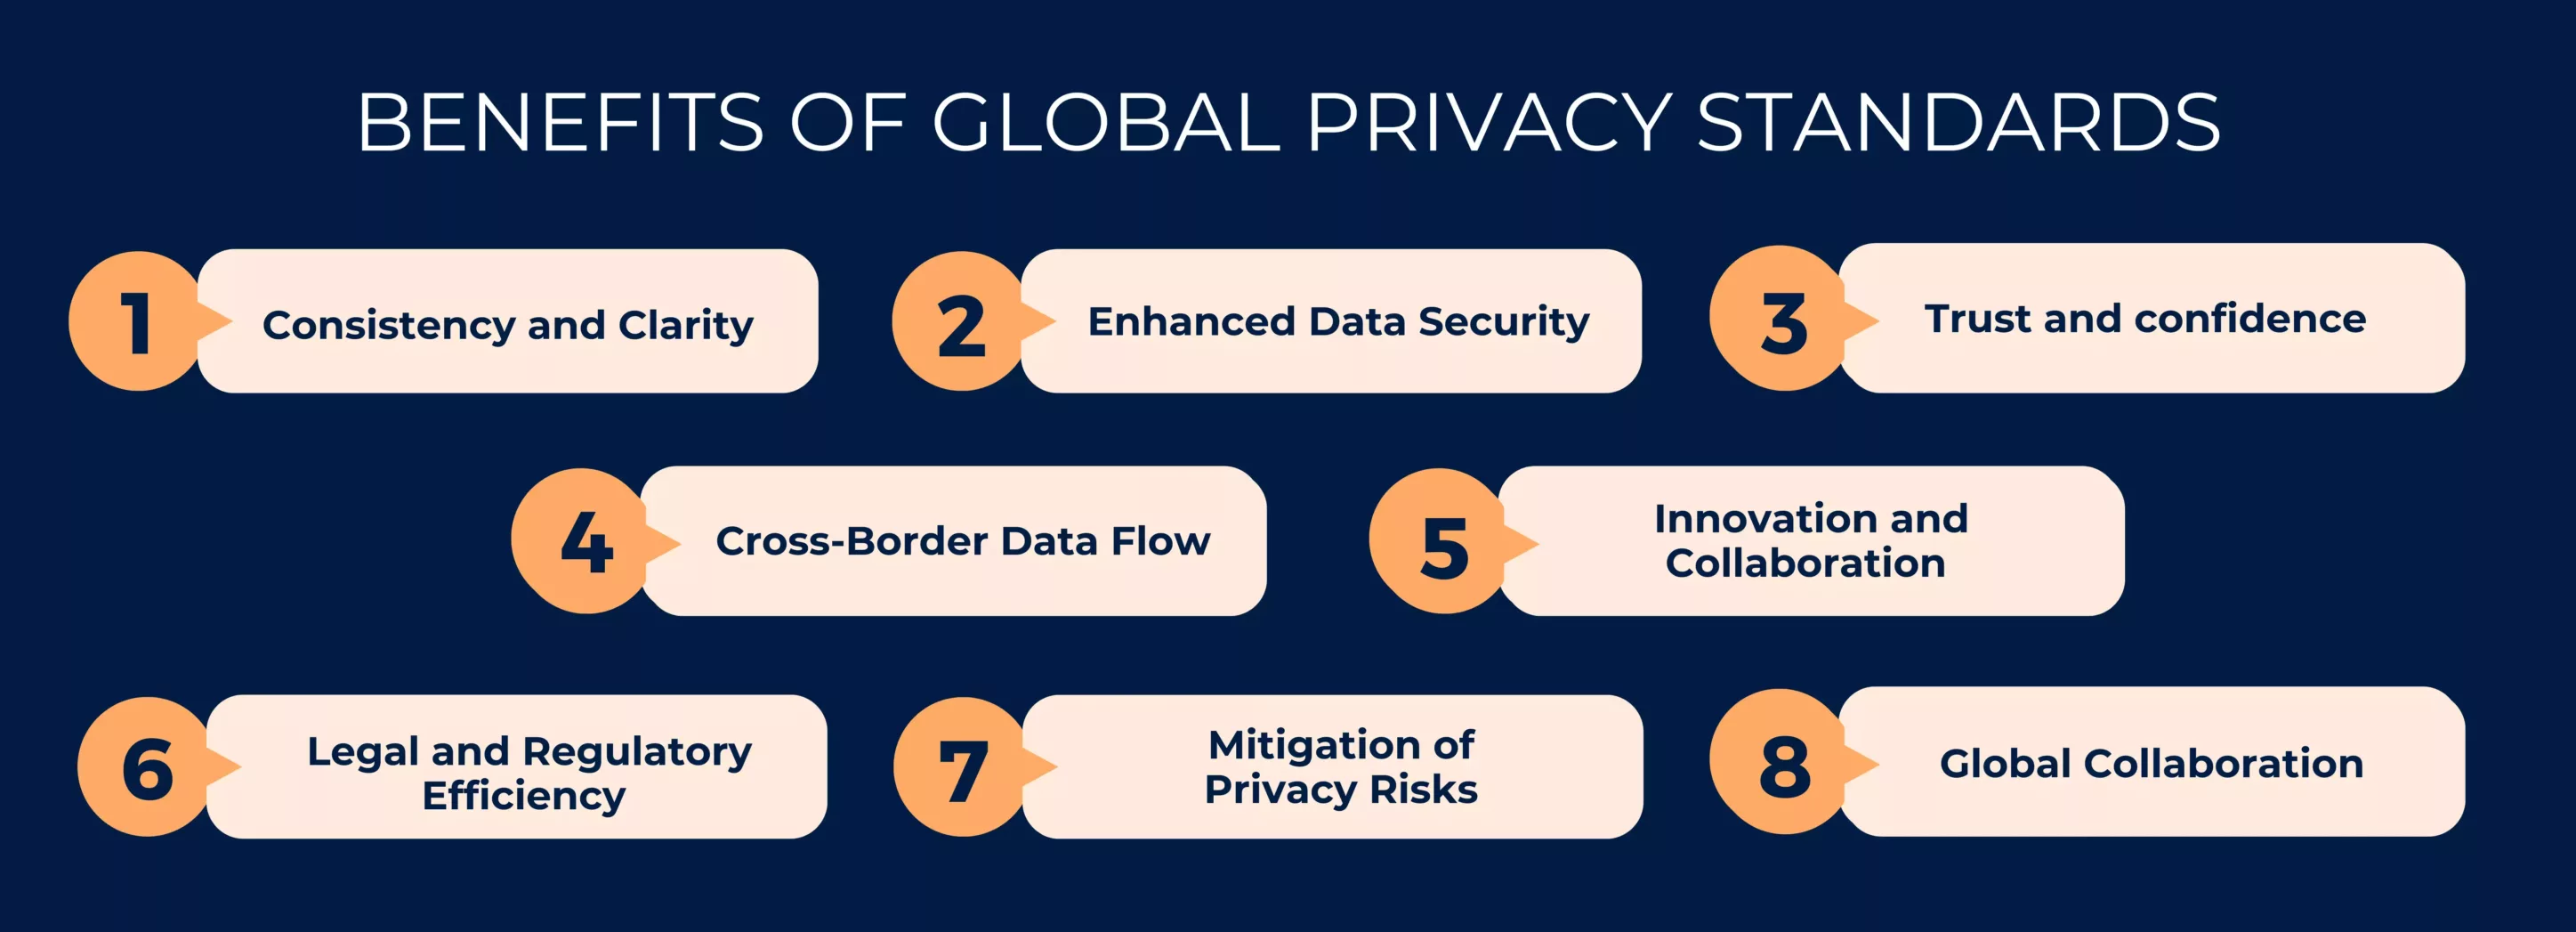 Benefits of Global privacy standards